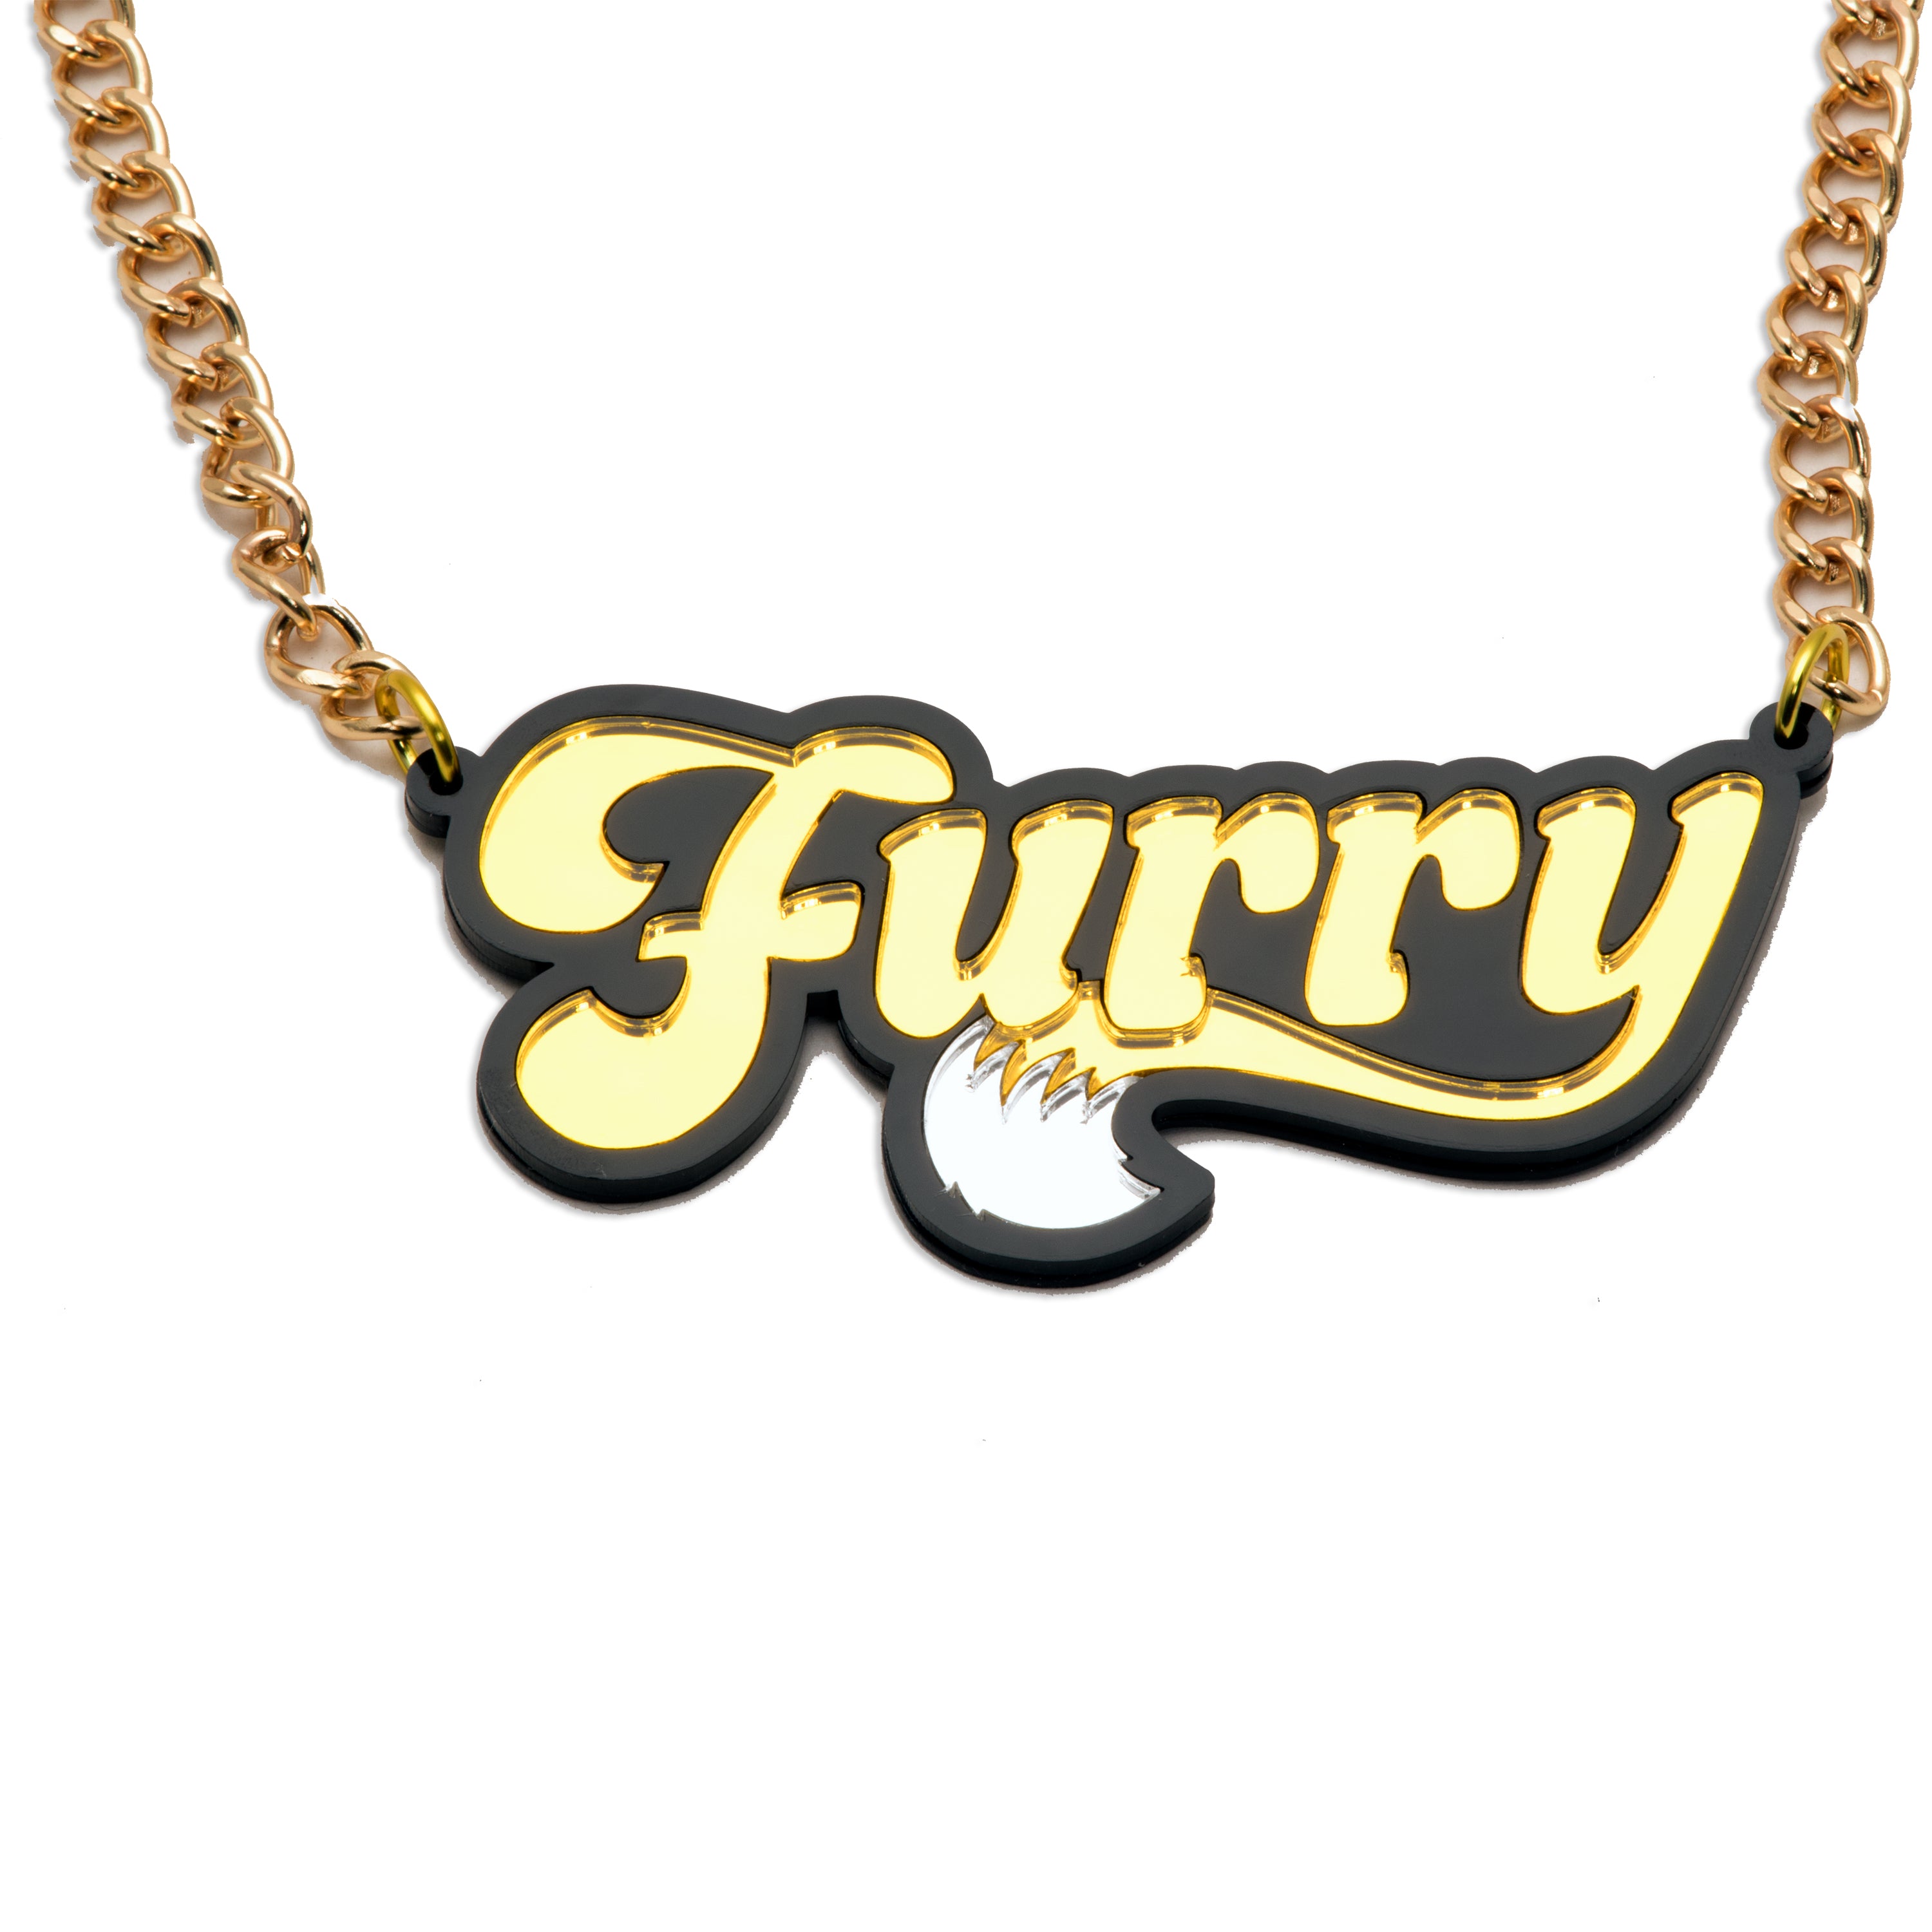 Furry Necklace - Gold Edition - Pawstar Pawstar Necklaces cosplay, costume, Cutebits, furry, ship-15, ship-15day